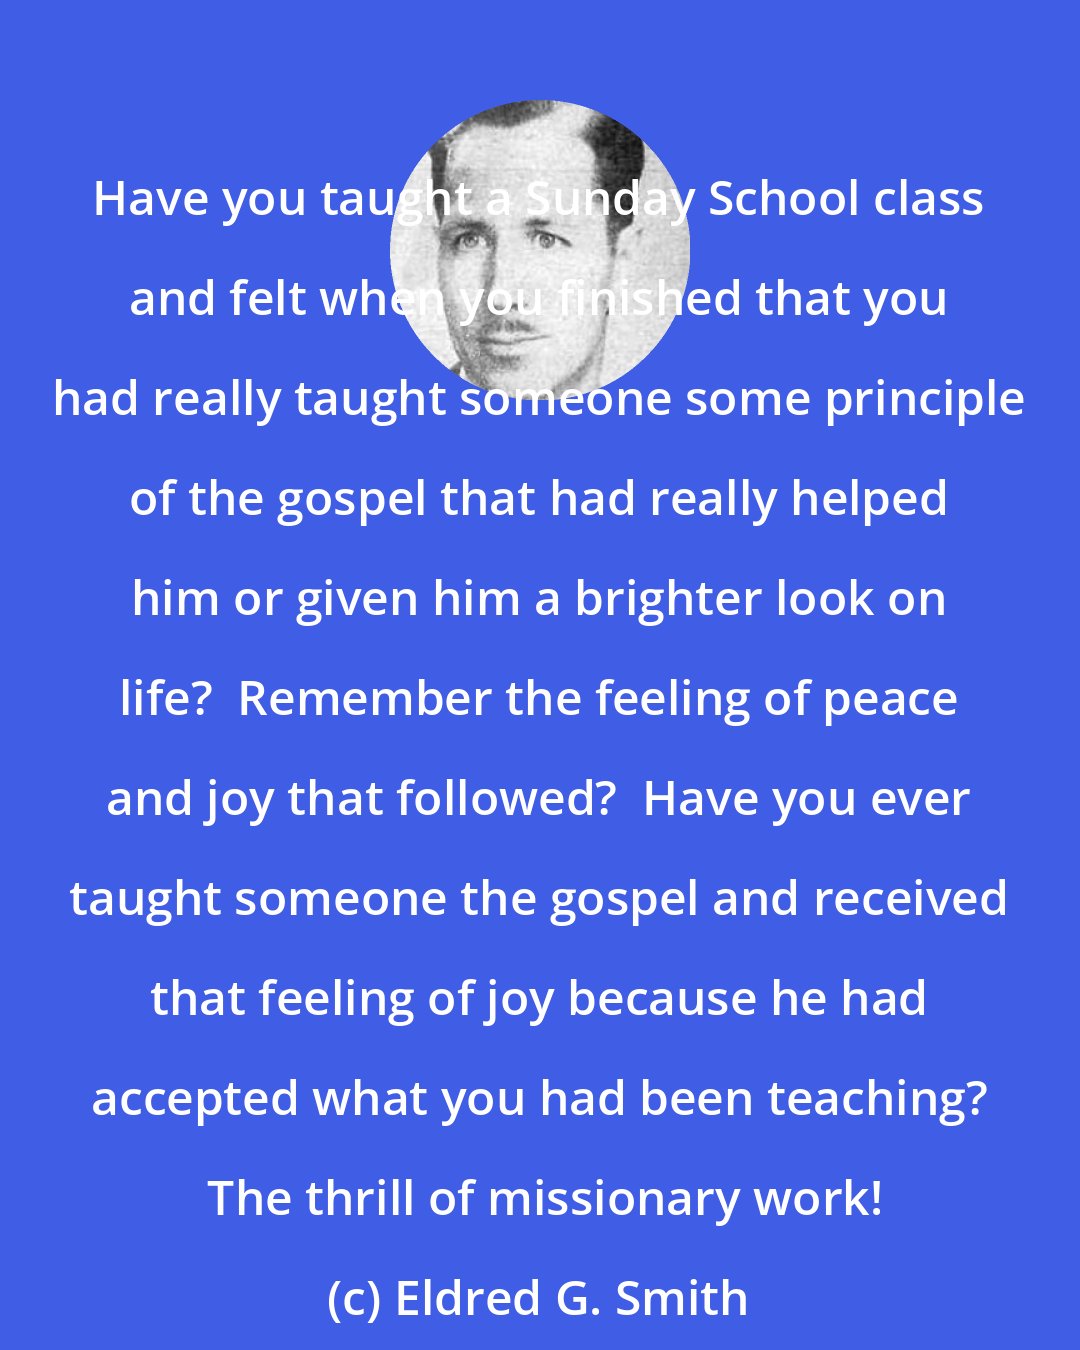 Eldred G. Smith: Have you taught a Sunday School class and felt when you finished that you had really taught someone some principle of the gospel that had really helped him or given him a brighter look on life?  Remember the feeling of peace and joy that followed?  Have you ever taught someone the gospel and received that feeling of joy because he had accepted what you had been teaching?  The thrill of missionary work!